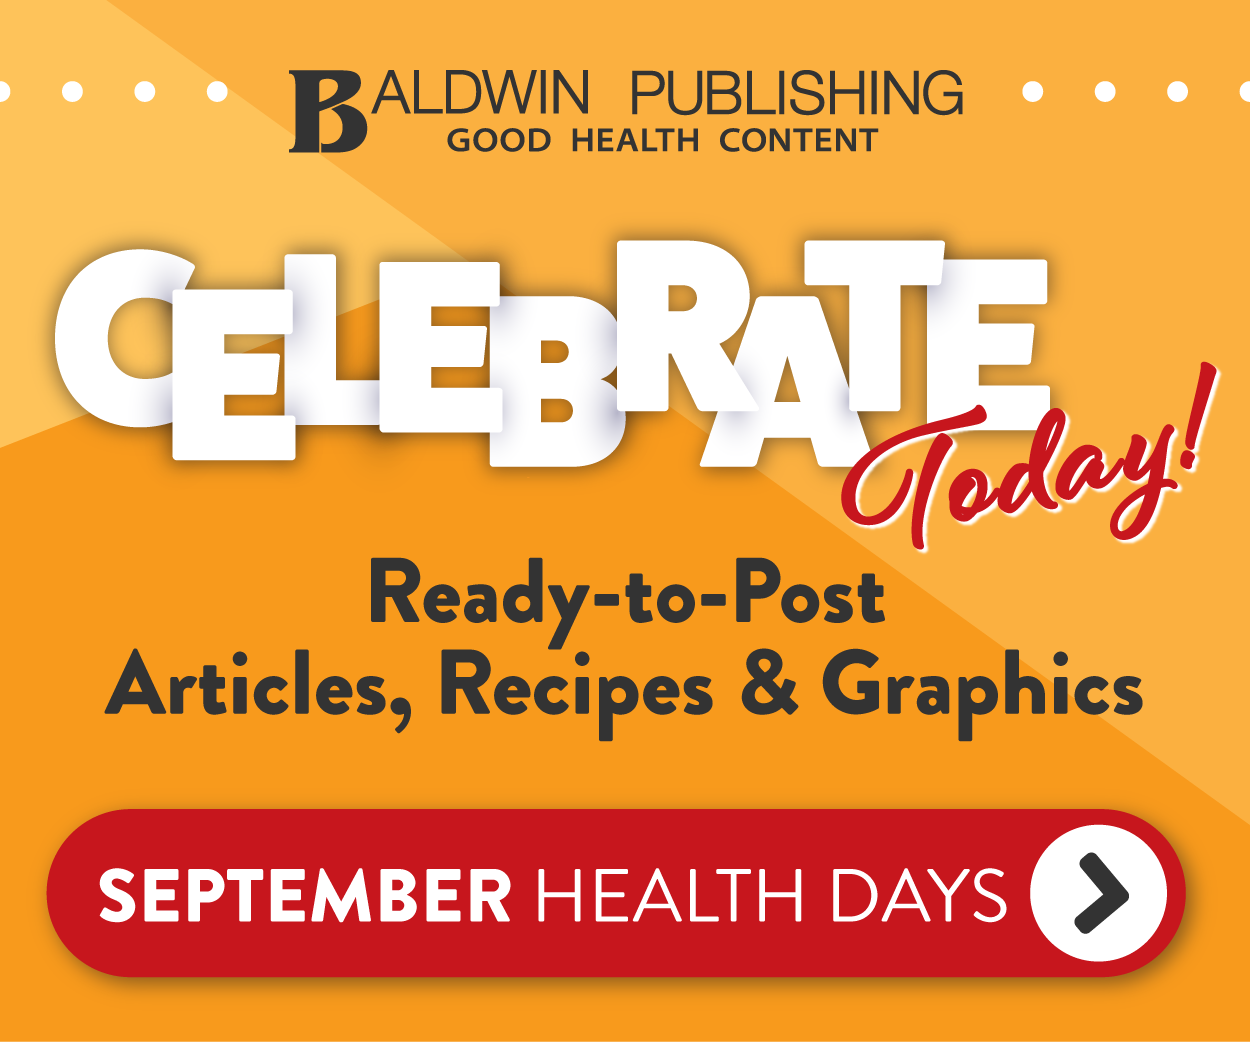 Baldwin Publishing - Celebrate Today, See All September Health Days